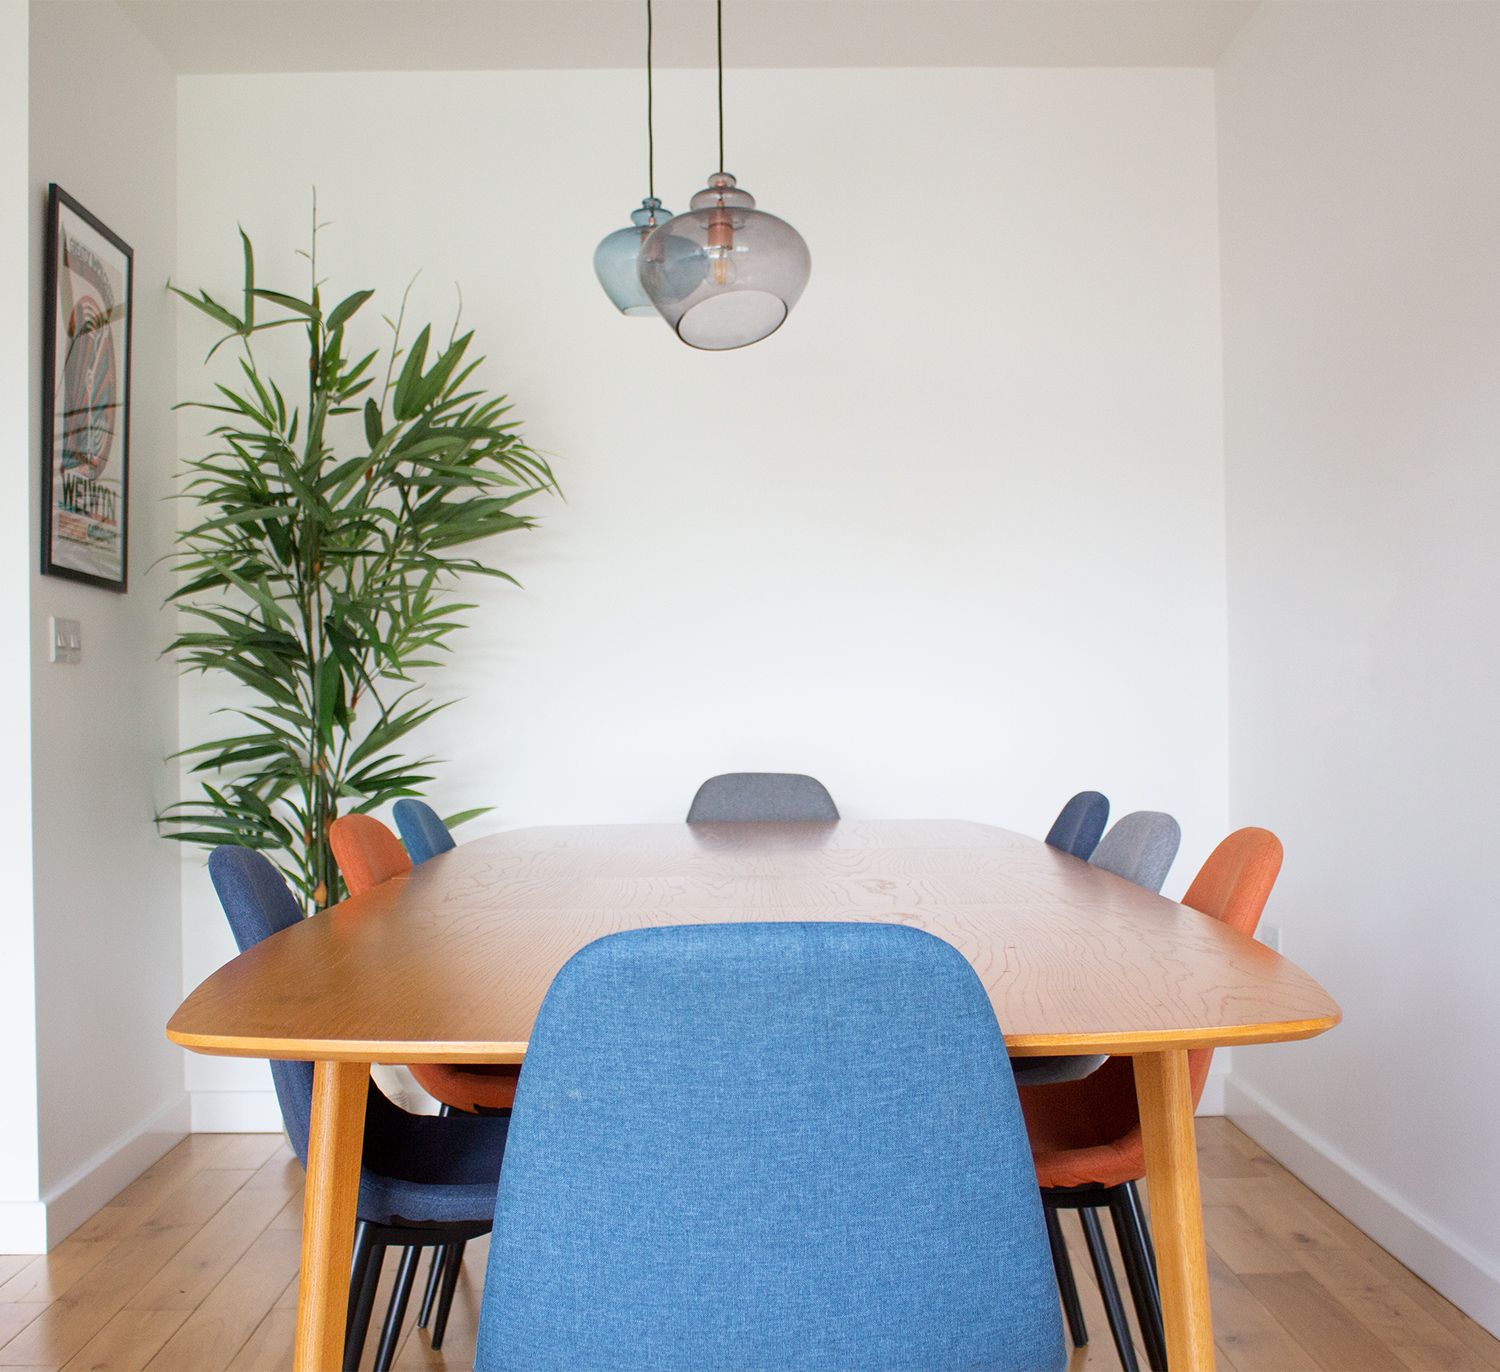 A photo of the mid century style dining table with upholstered chairs in blue, orange and grey.